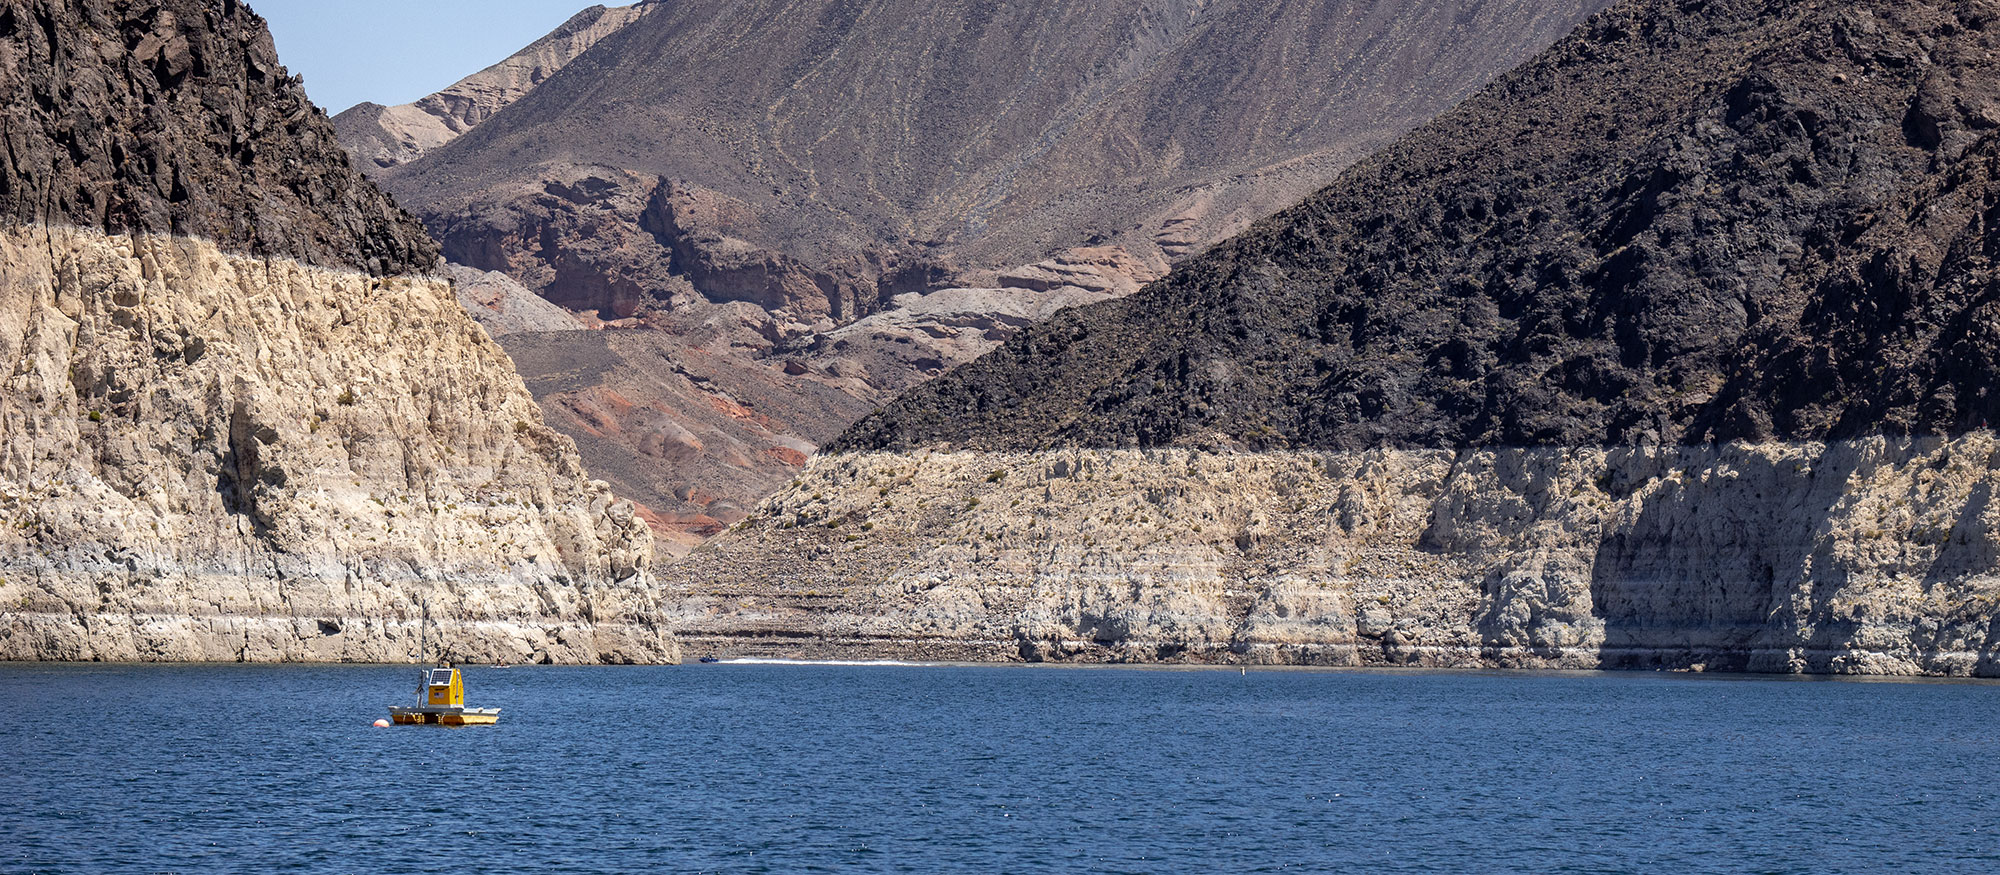 A boat sailing on Lake Mead.